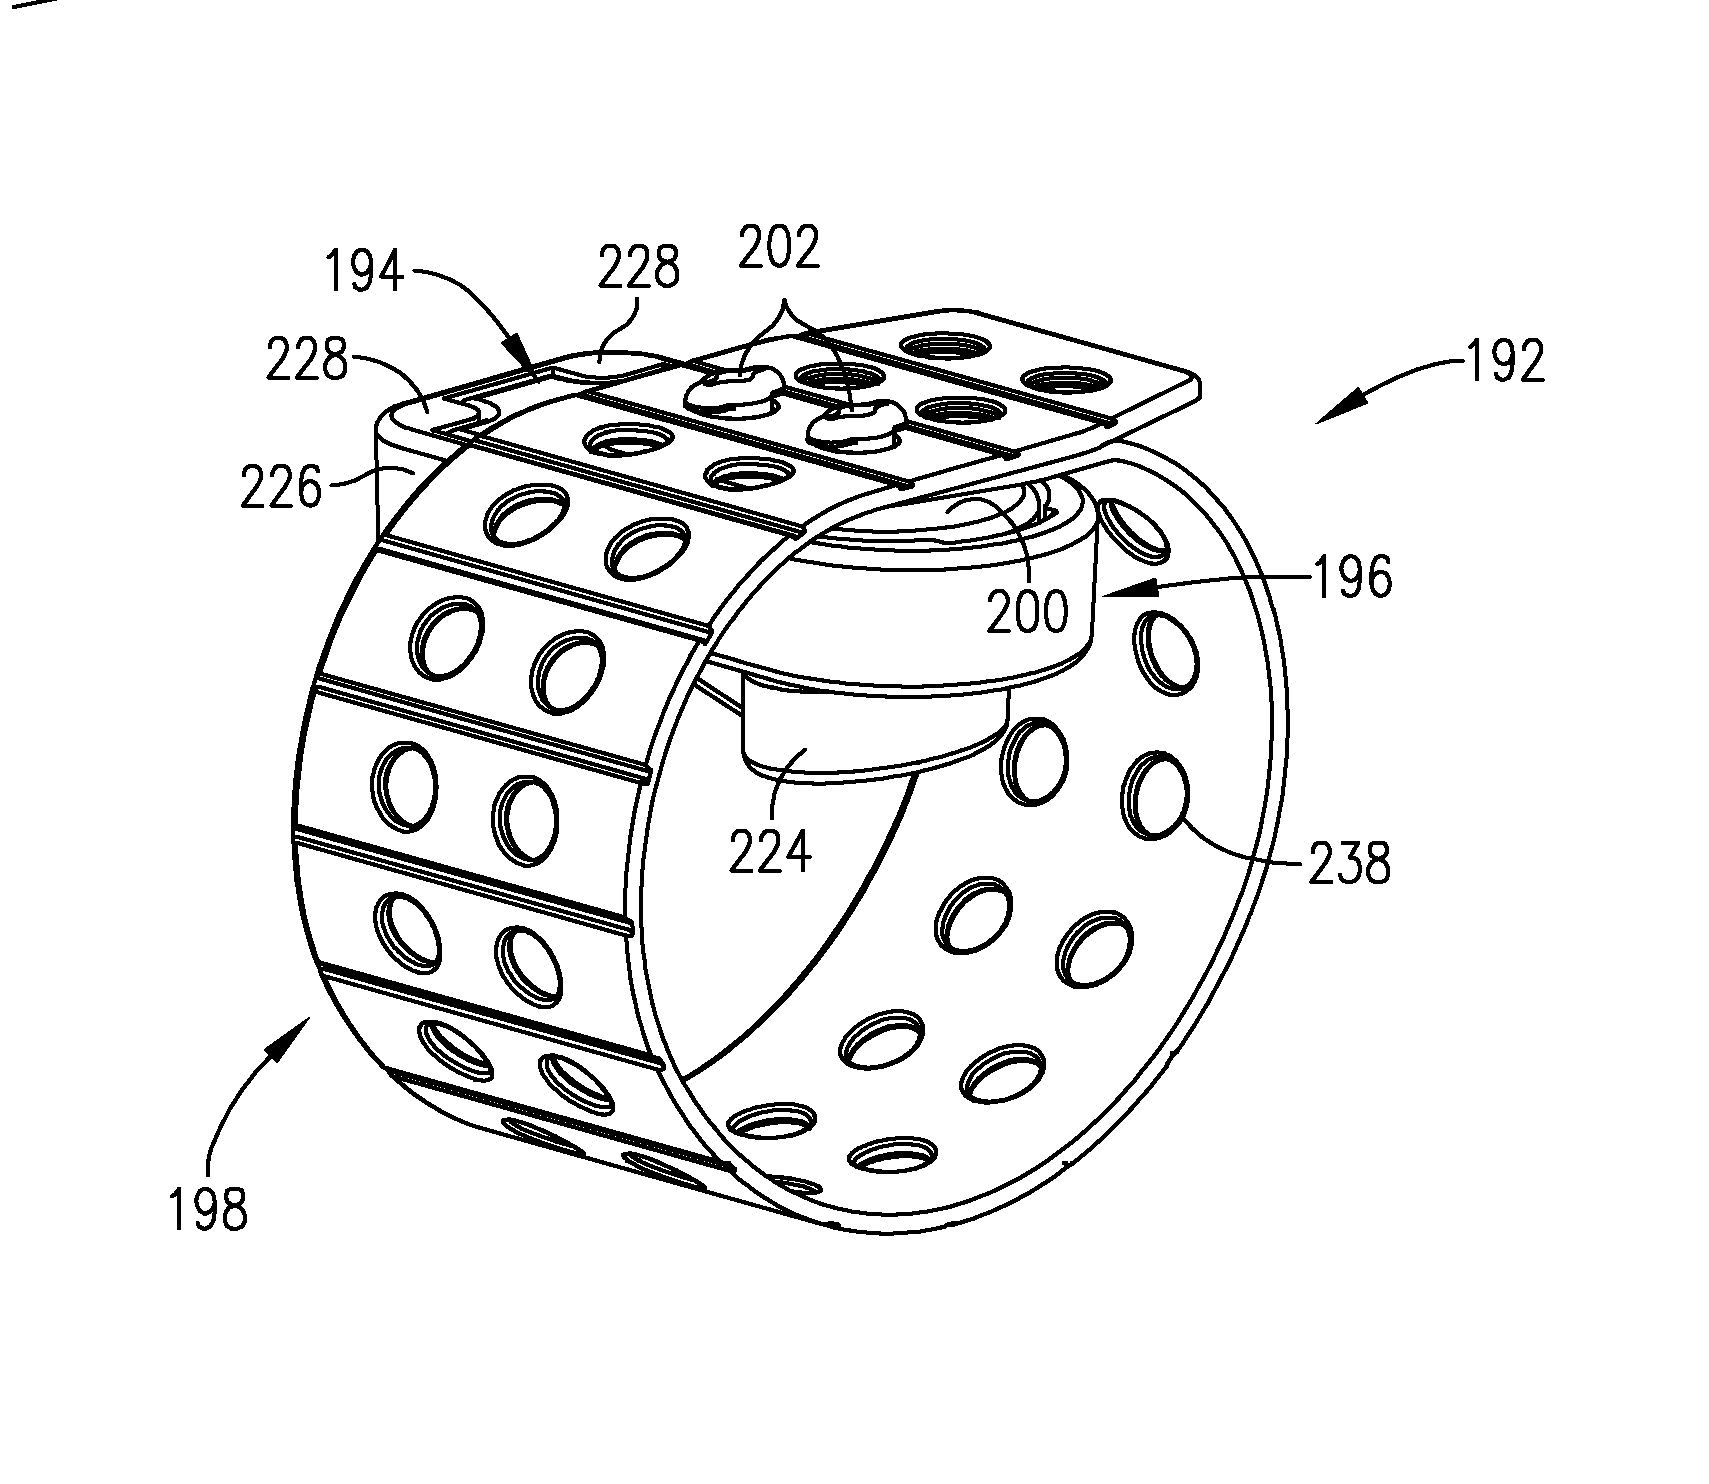 Vascular wound closing apparatus and method